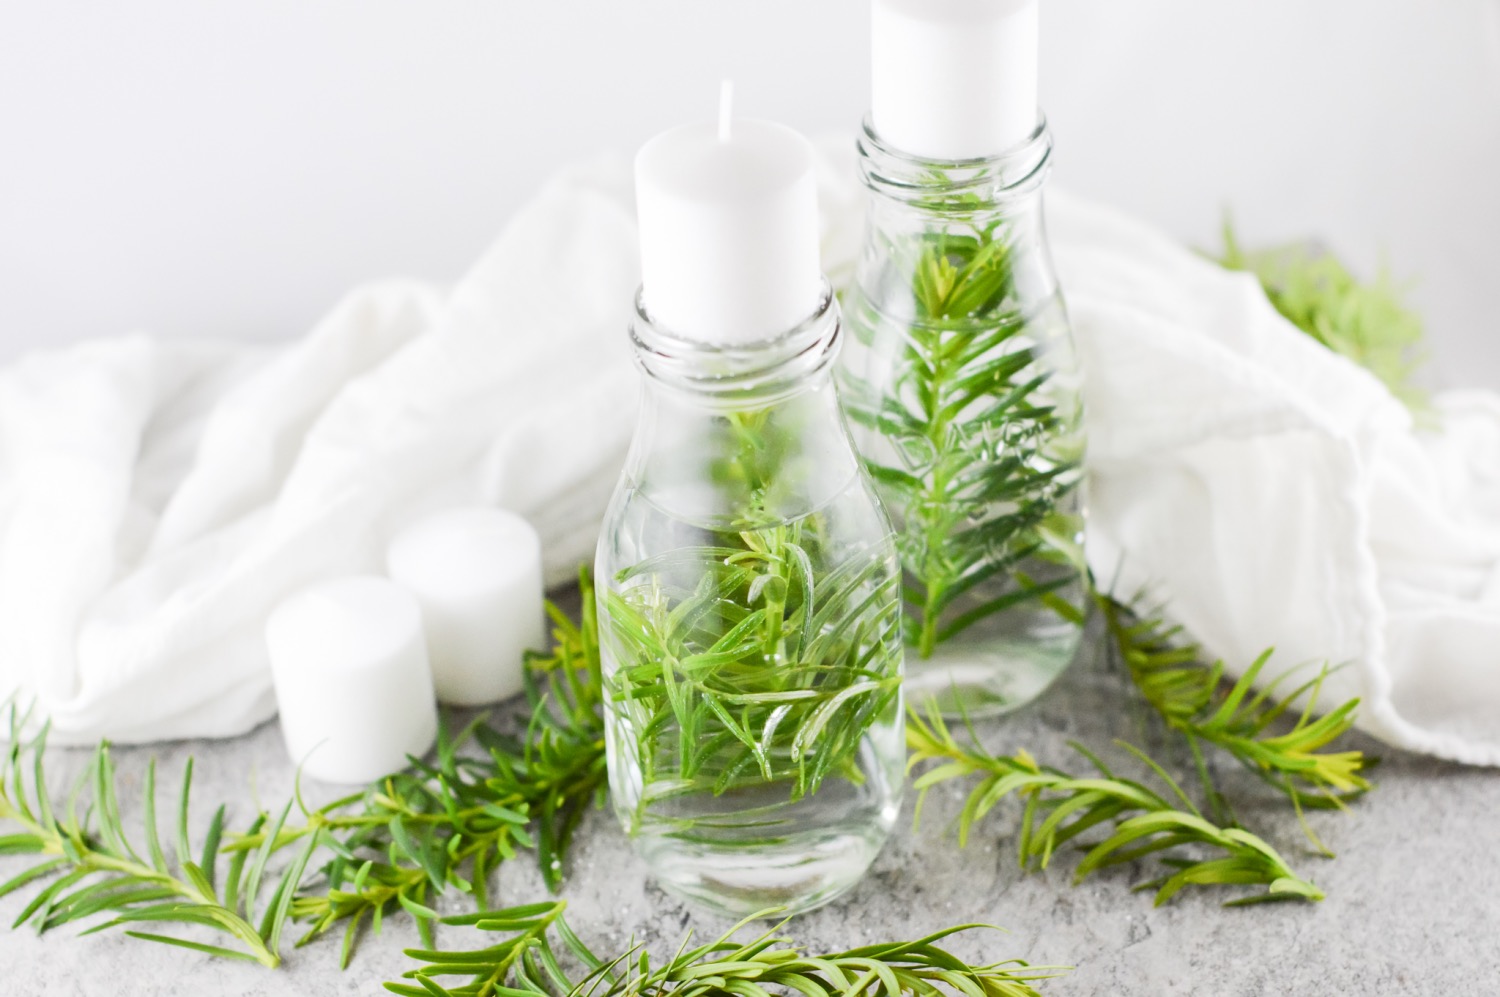 finished diy homemade water candles with fresh herbs